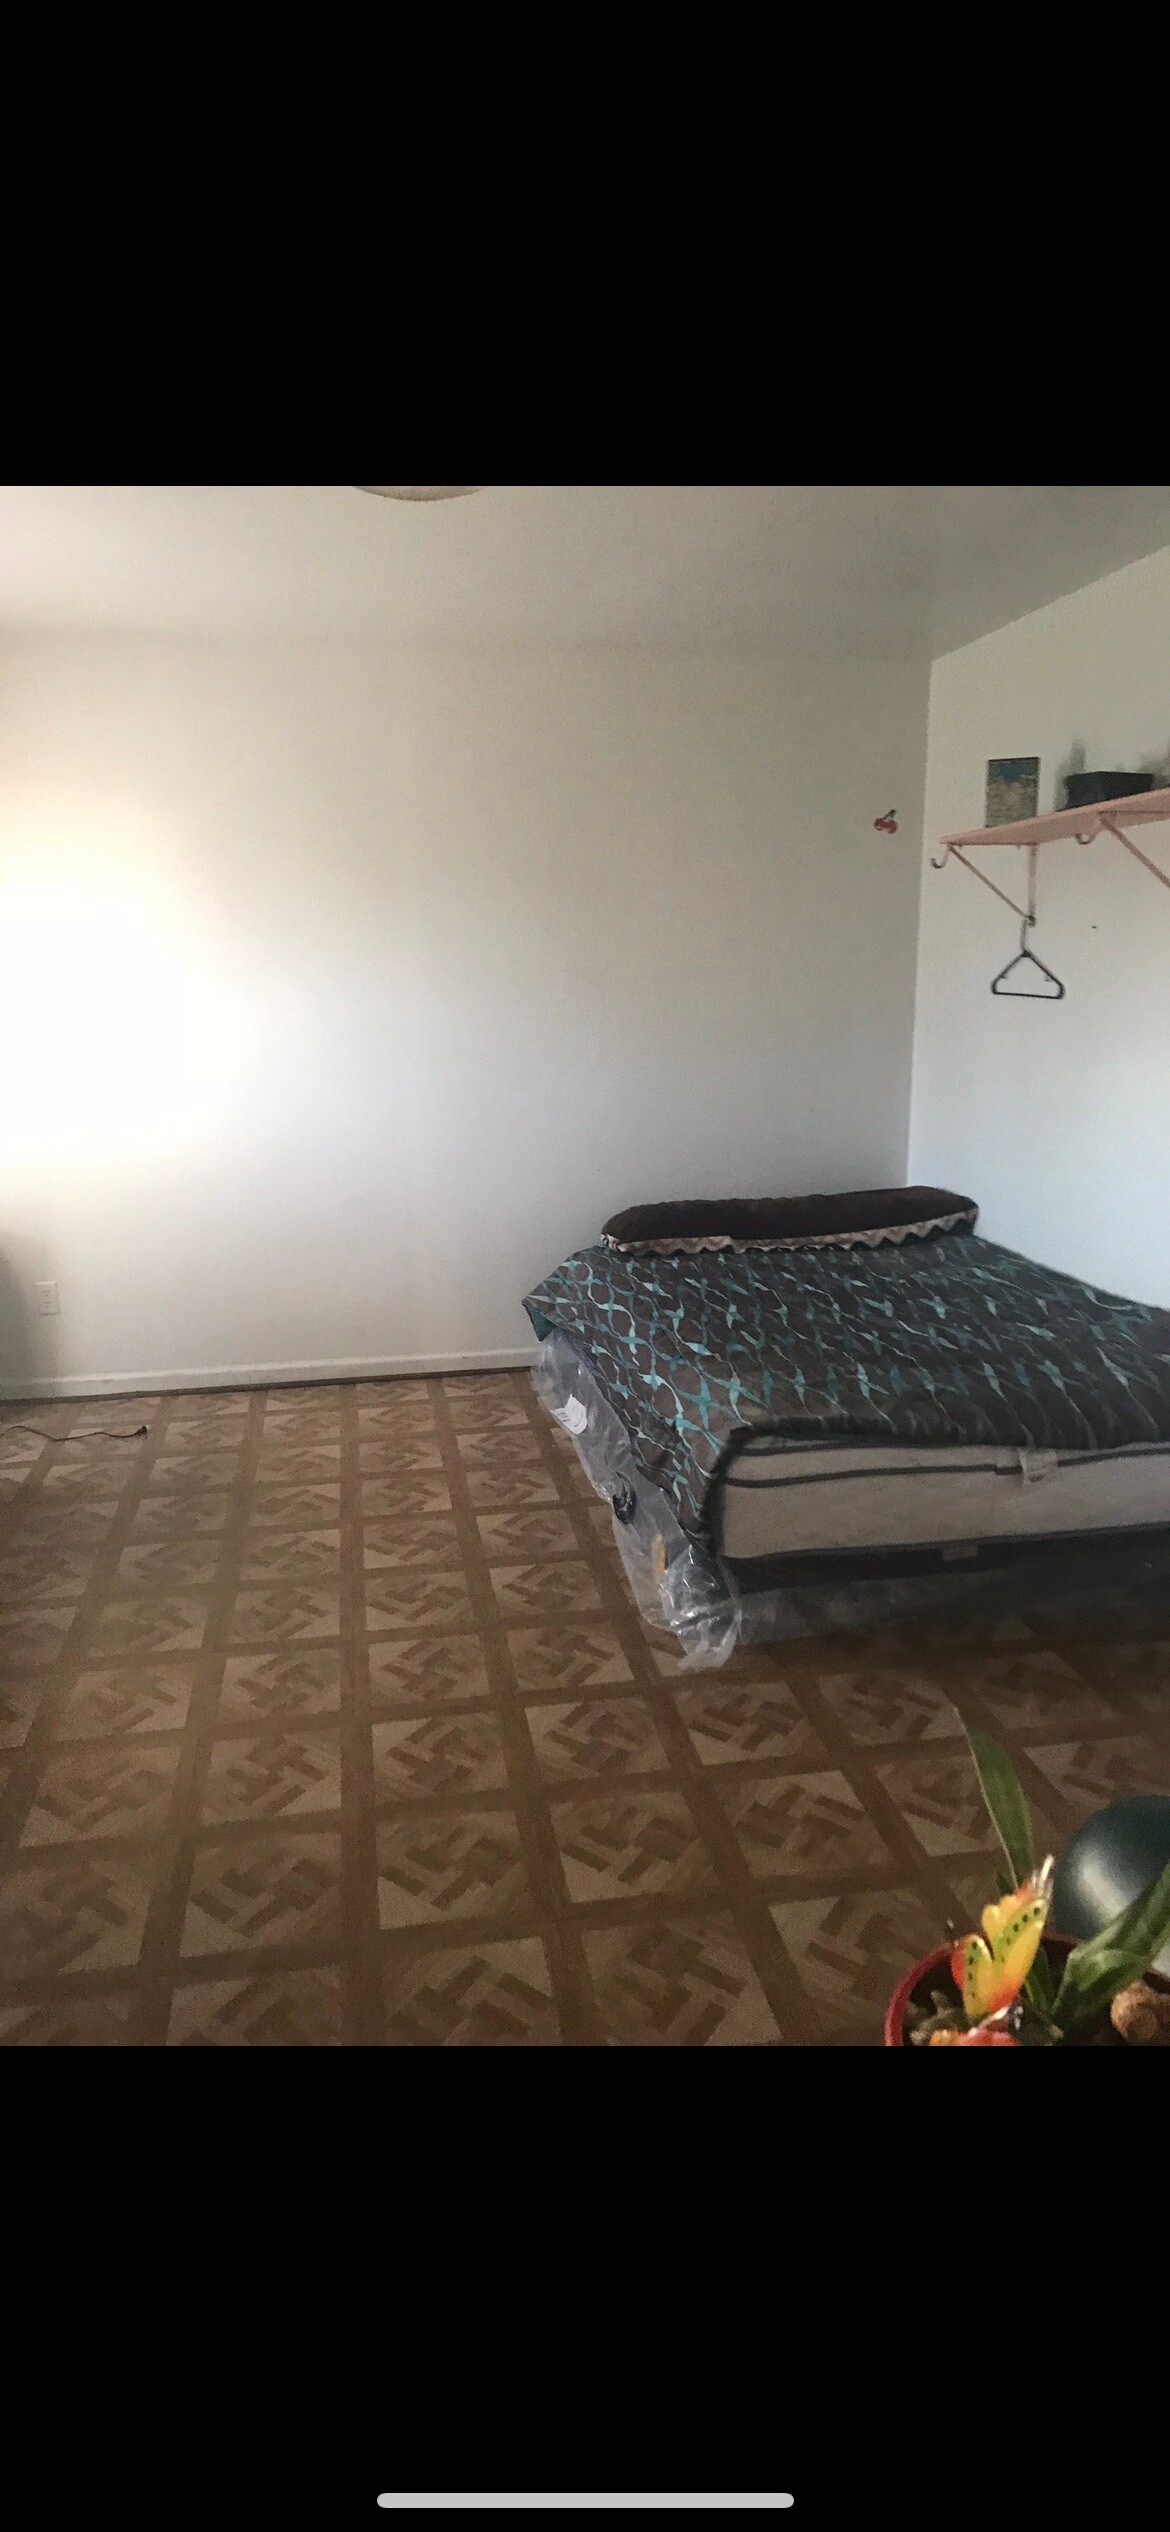 Clean 4 bedroom with space galore Pets welcome